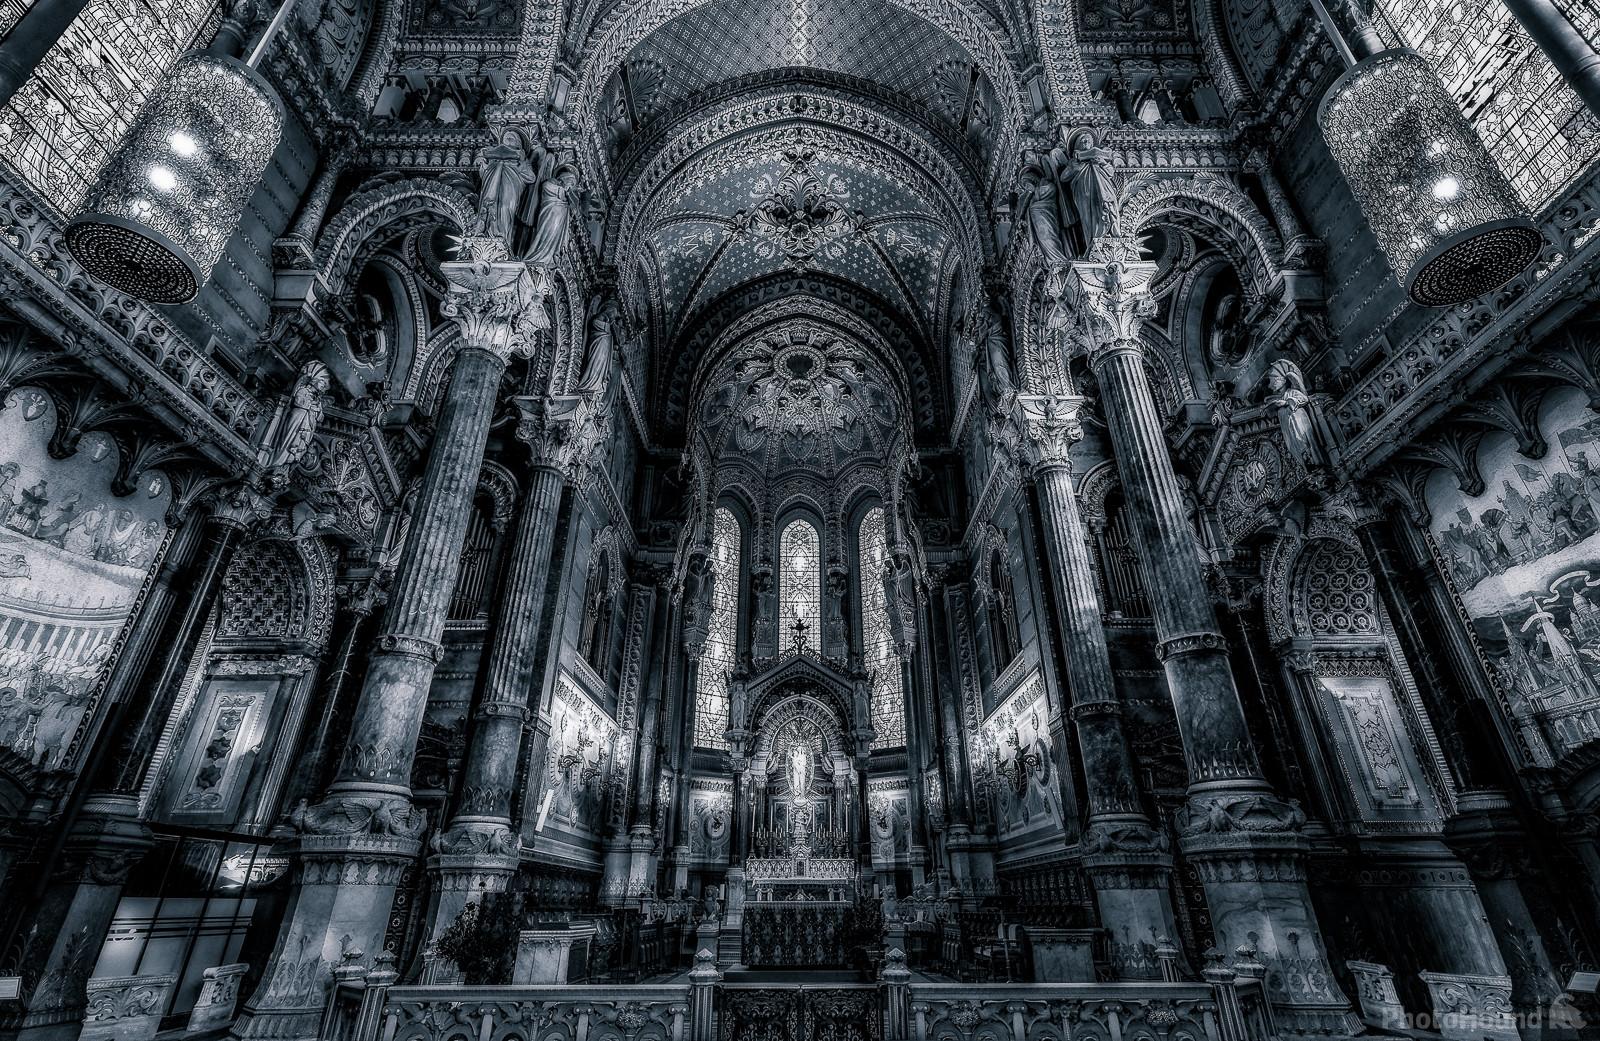 Image of Interior of the basilica of Fourviere by Frédéric Monin